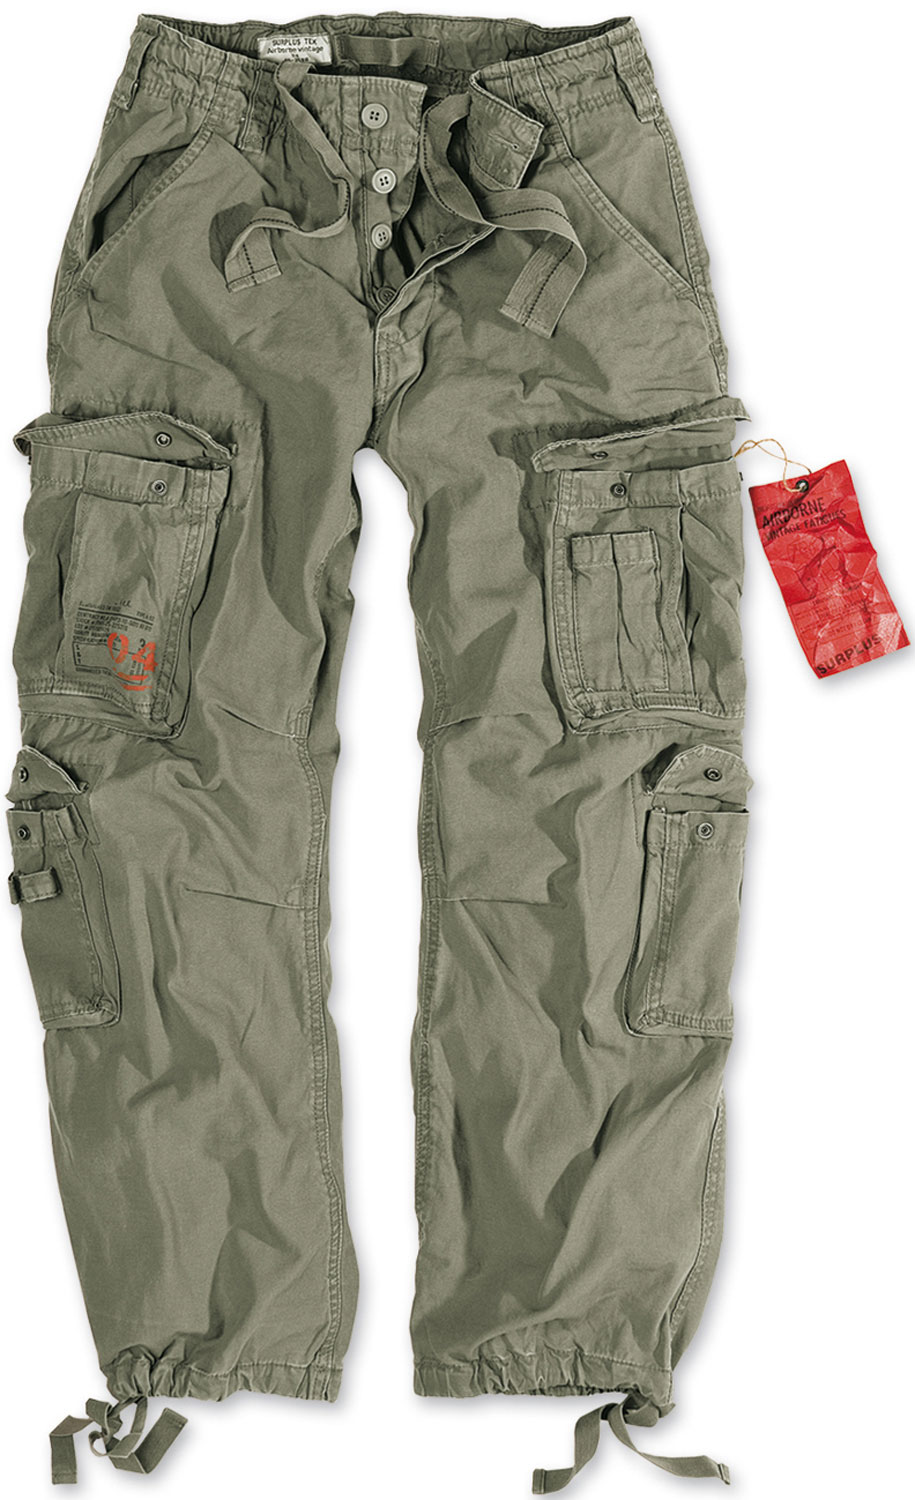 SURPLUS AIRBORNE TROUSERS OLIVE GREEN RAW VINTAGE CARGO COMBAT PANTS ...